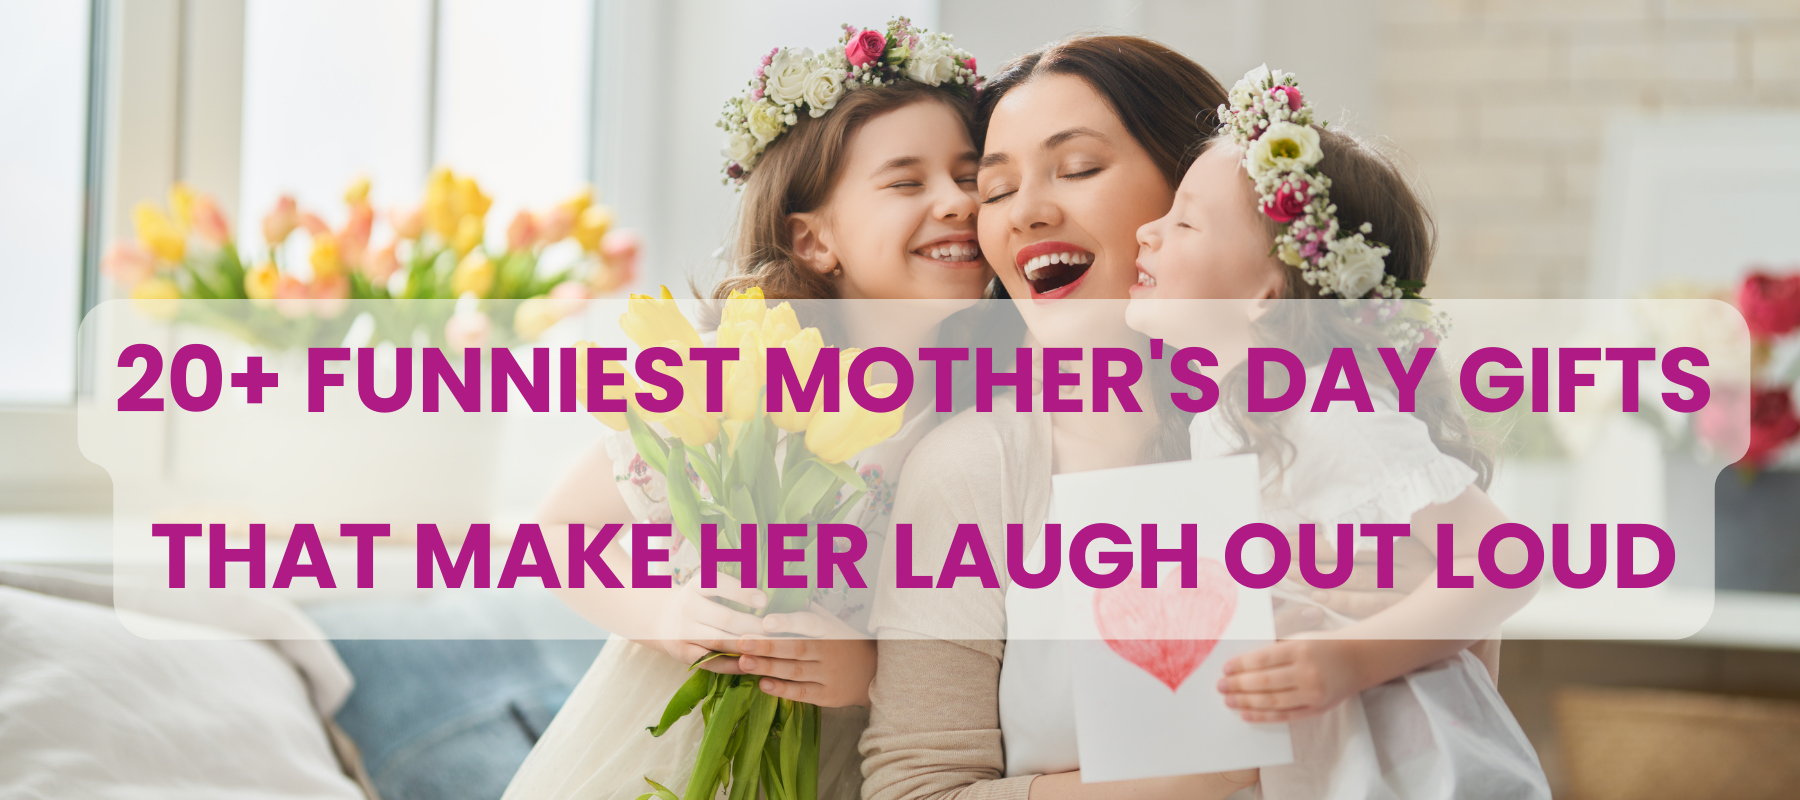 20+ Funniest Mother's Day Gifts That'll Probably Make Her Laugh Out Loud